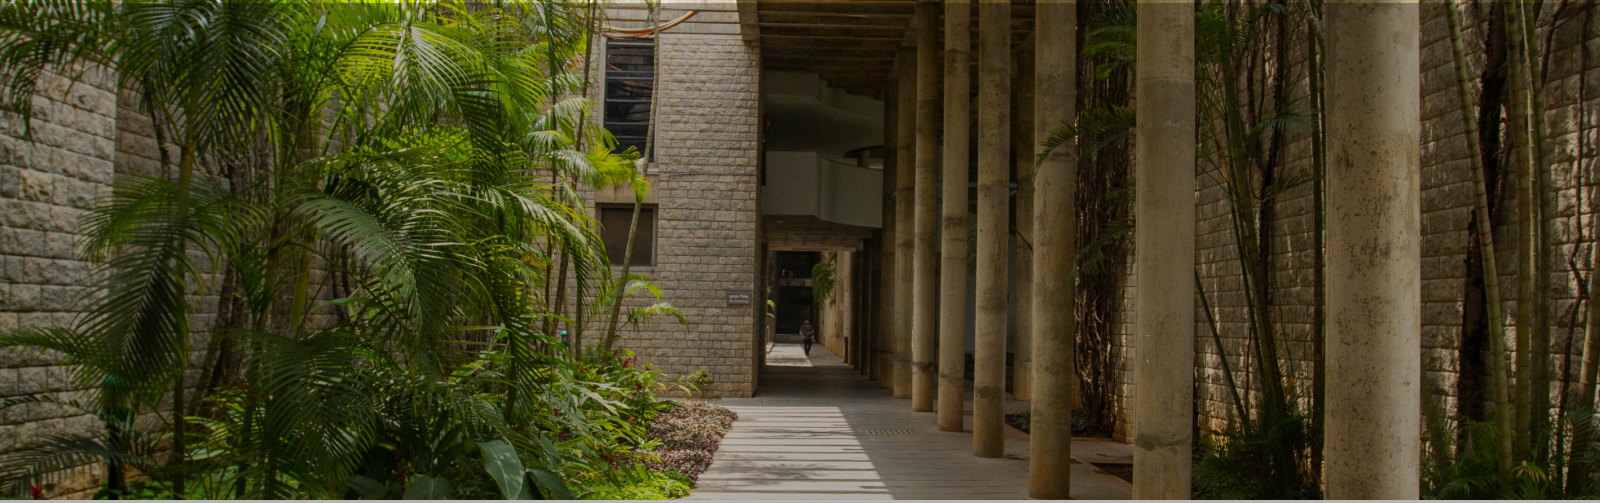 Scenic walkway with greenery and pillars at Indian Institute of Management, Bangalore corridor.